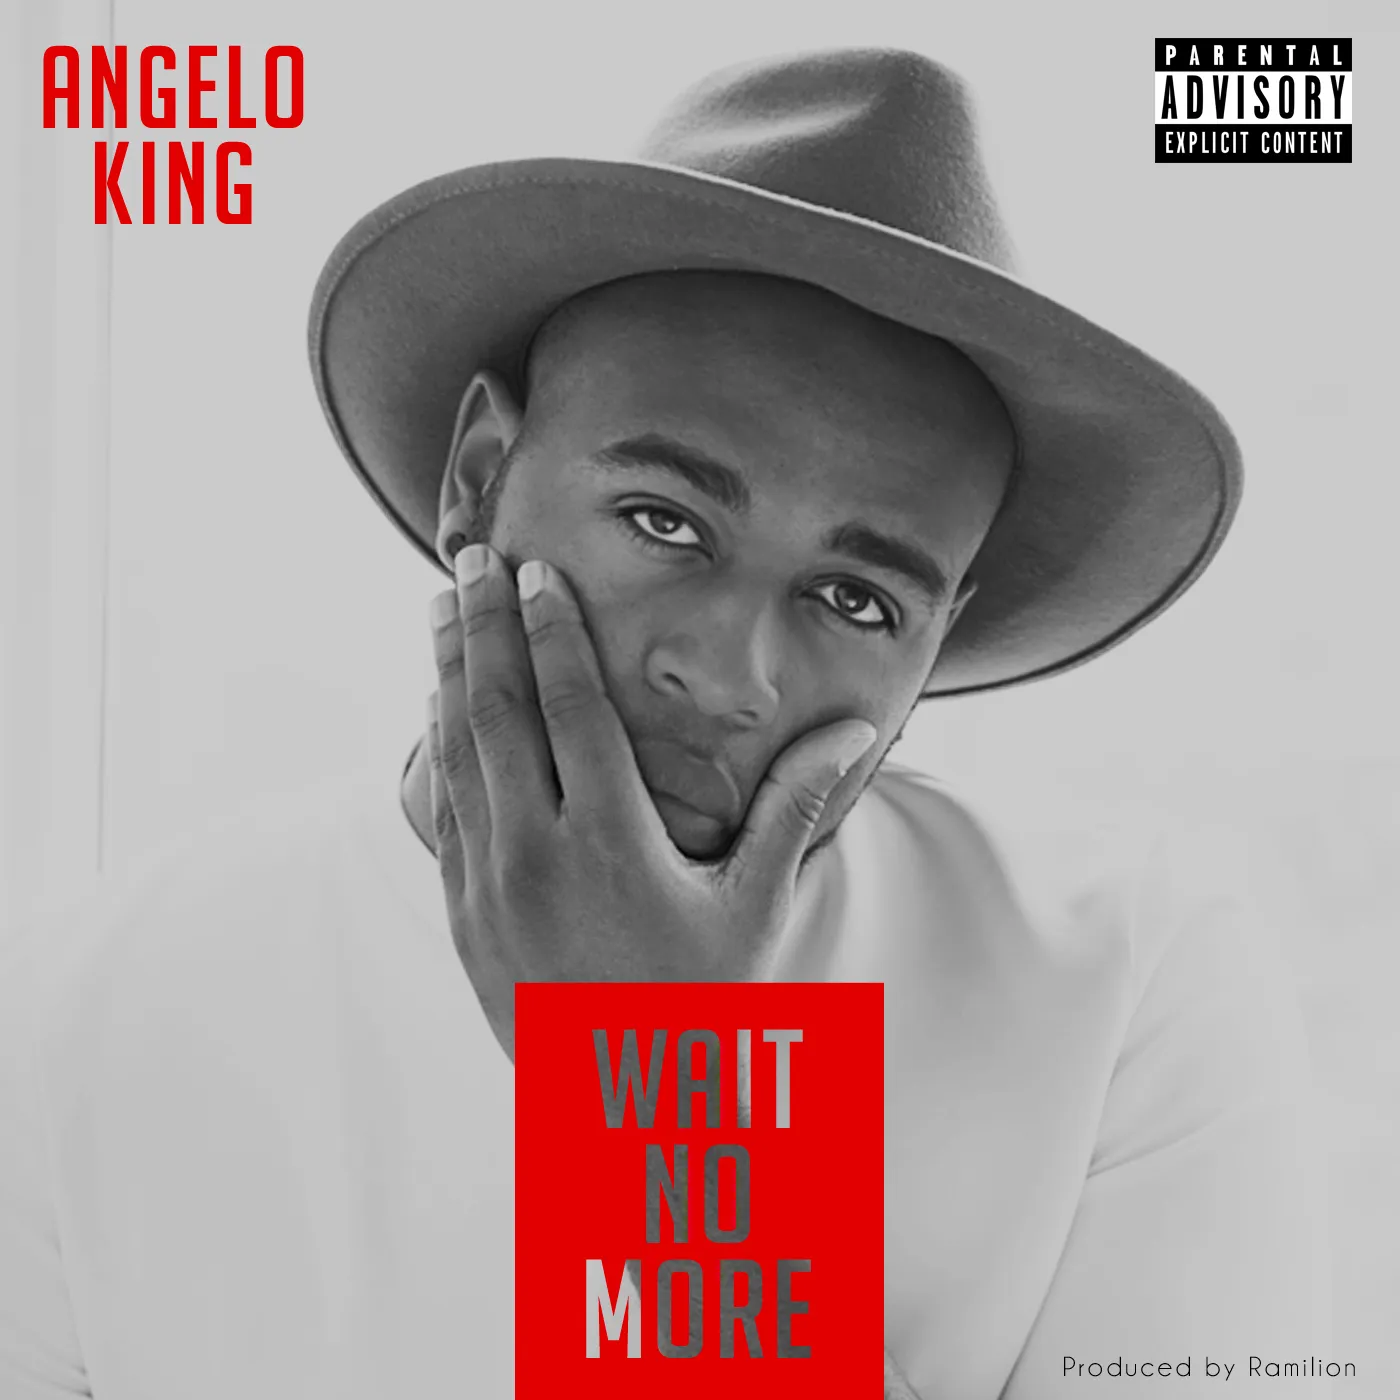 Angelo King Wait no more cover